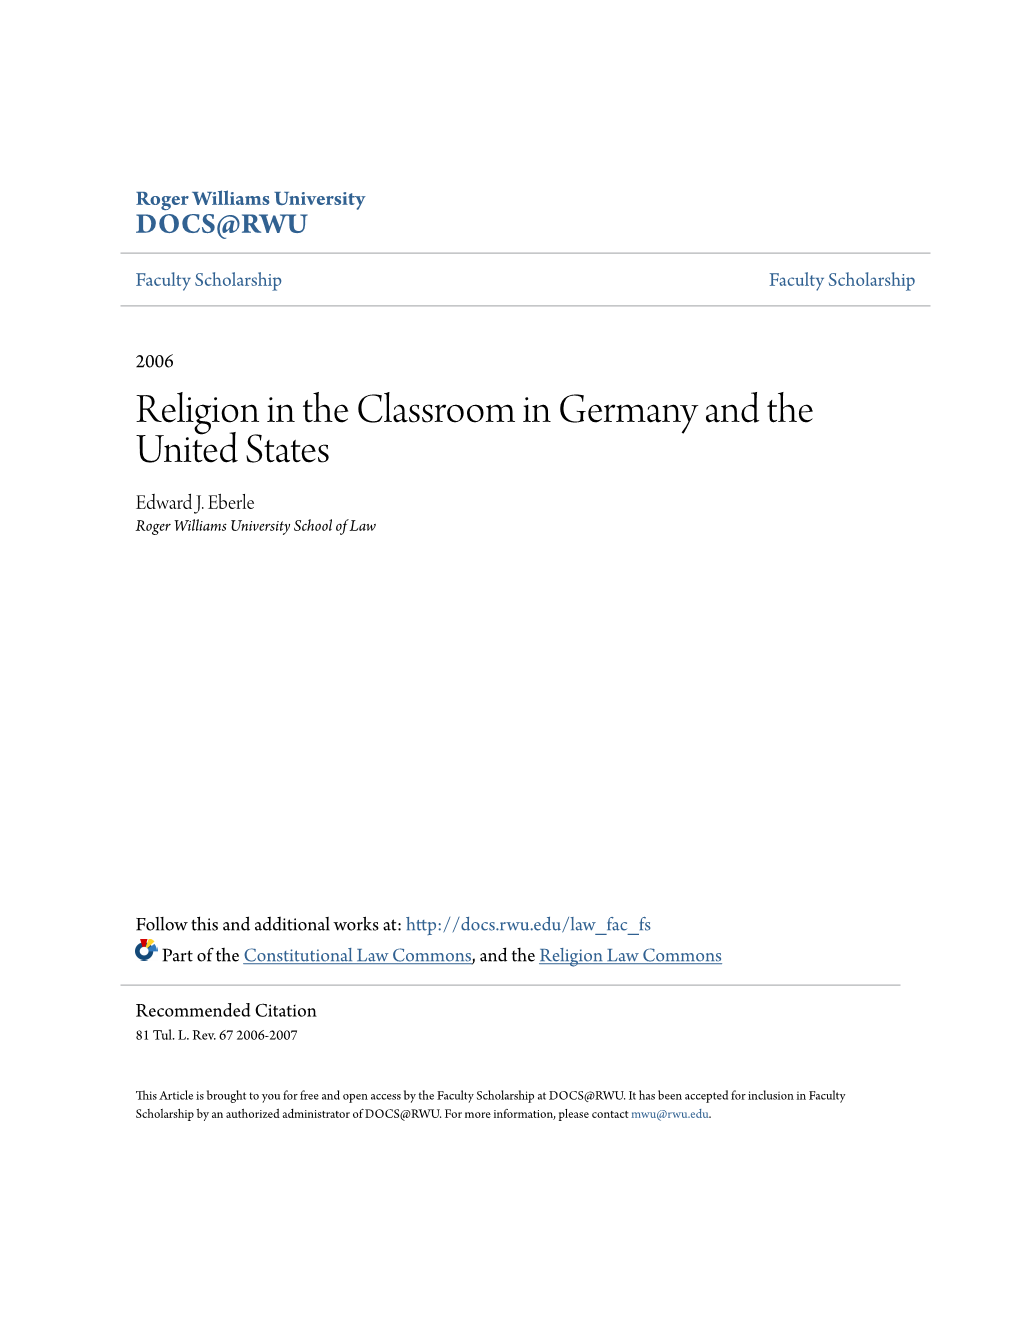 Religion in the Classroom in Germany and the United States Edward J